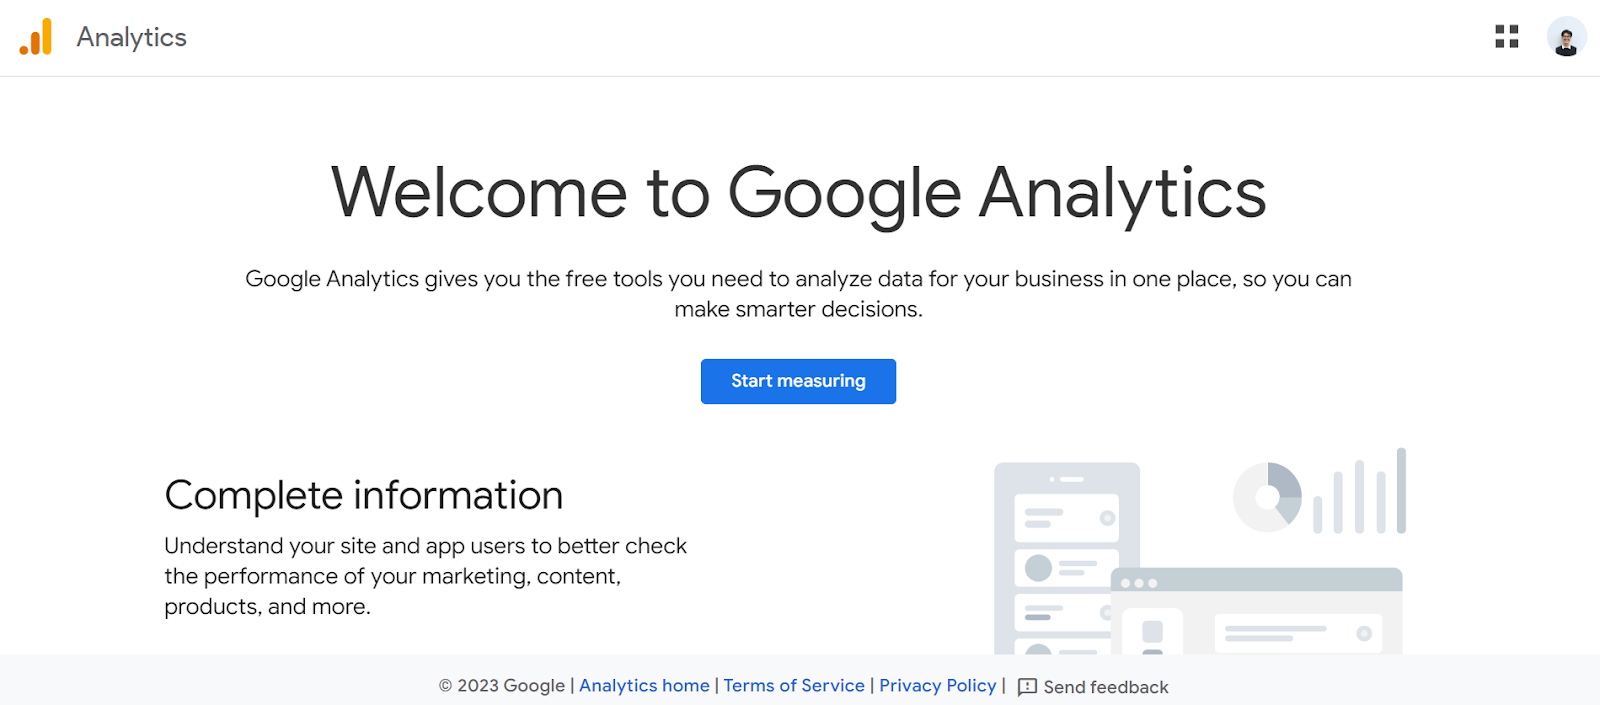 Step 2: Setting Up Your Analytics Account: Access the Analytics Site